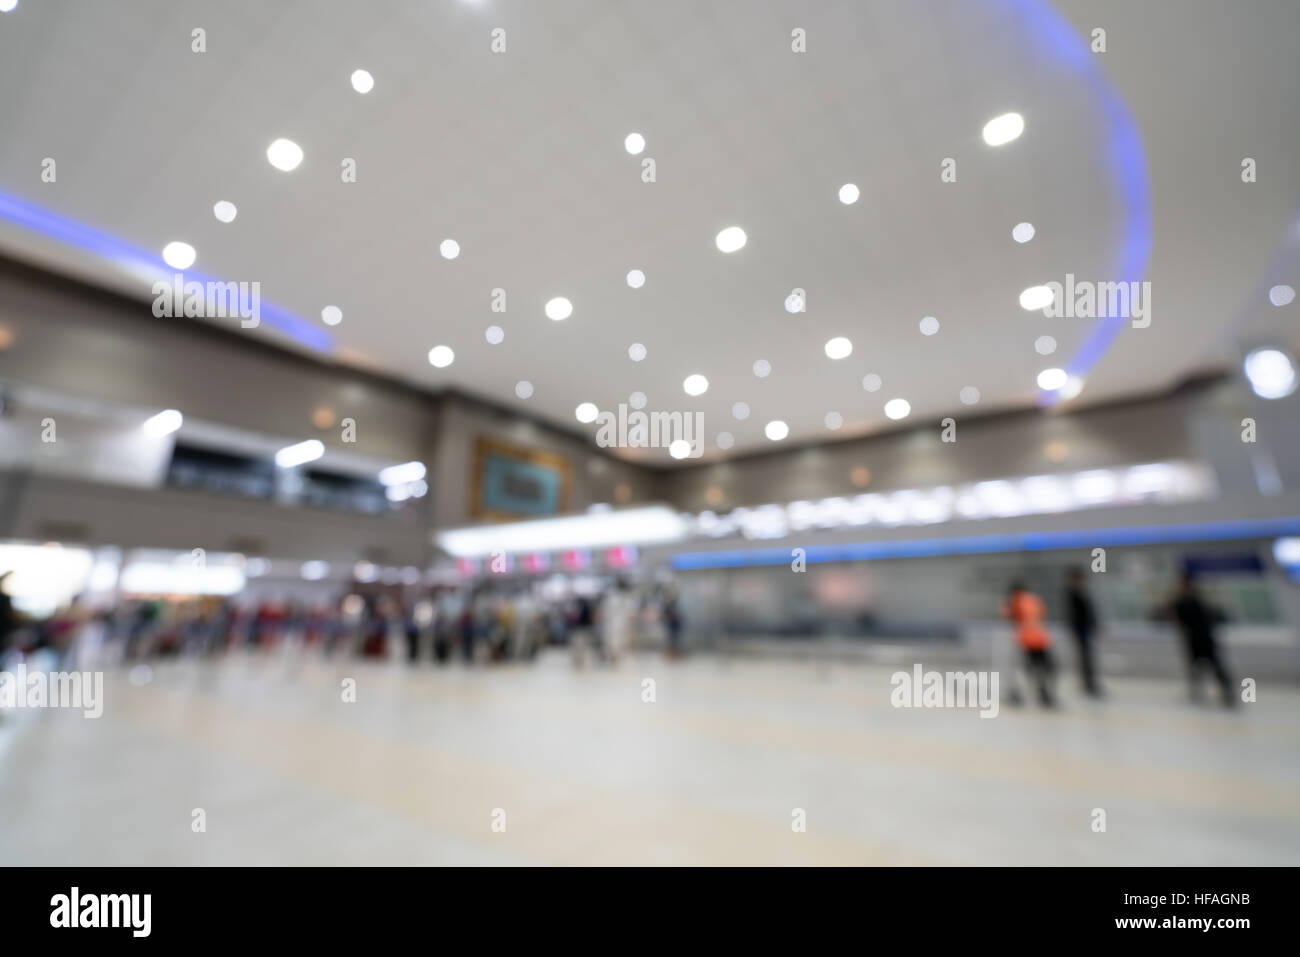 Blurred, bokeh background image of a big hall room Stock Photo